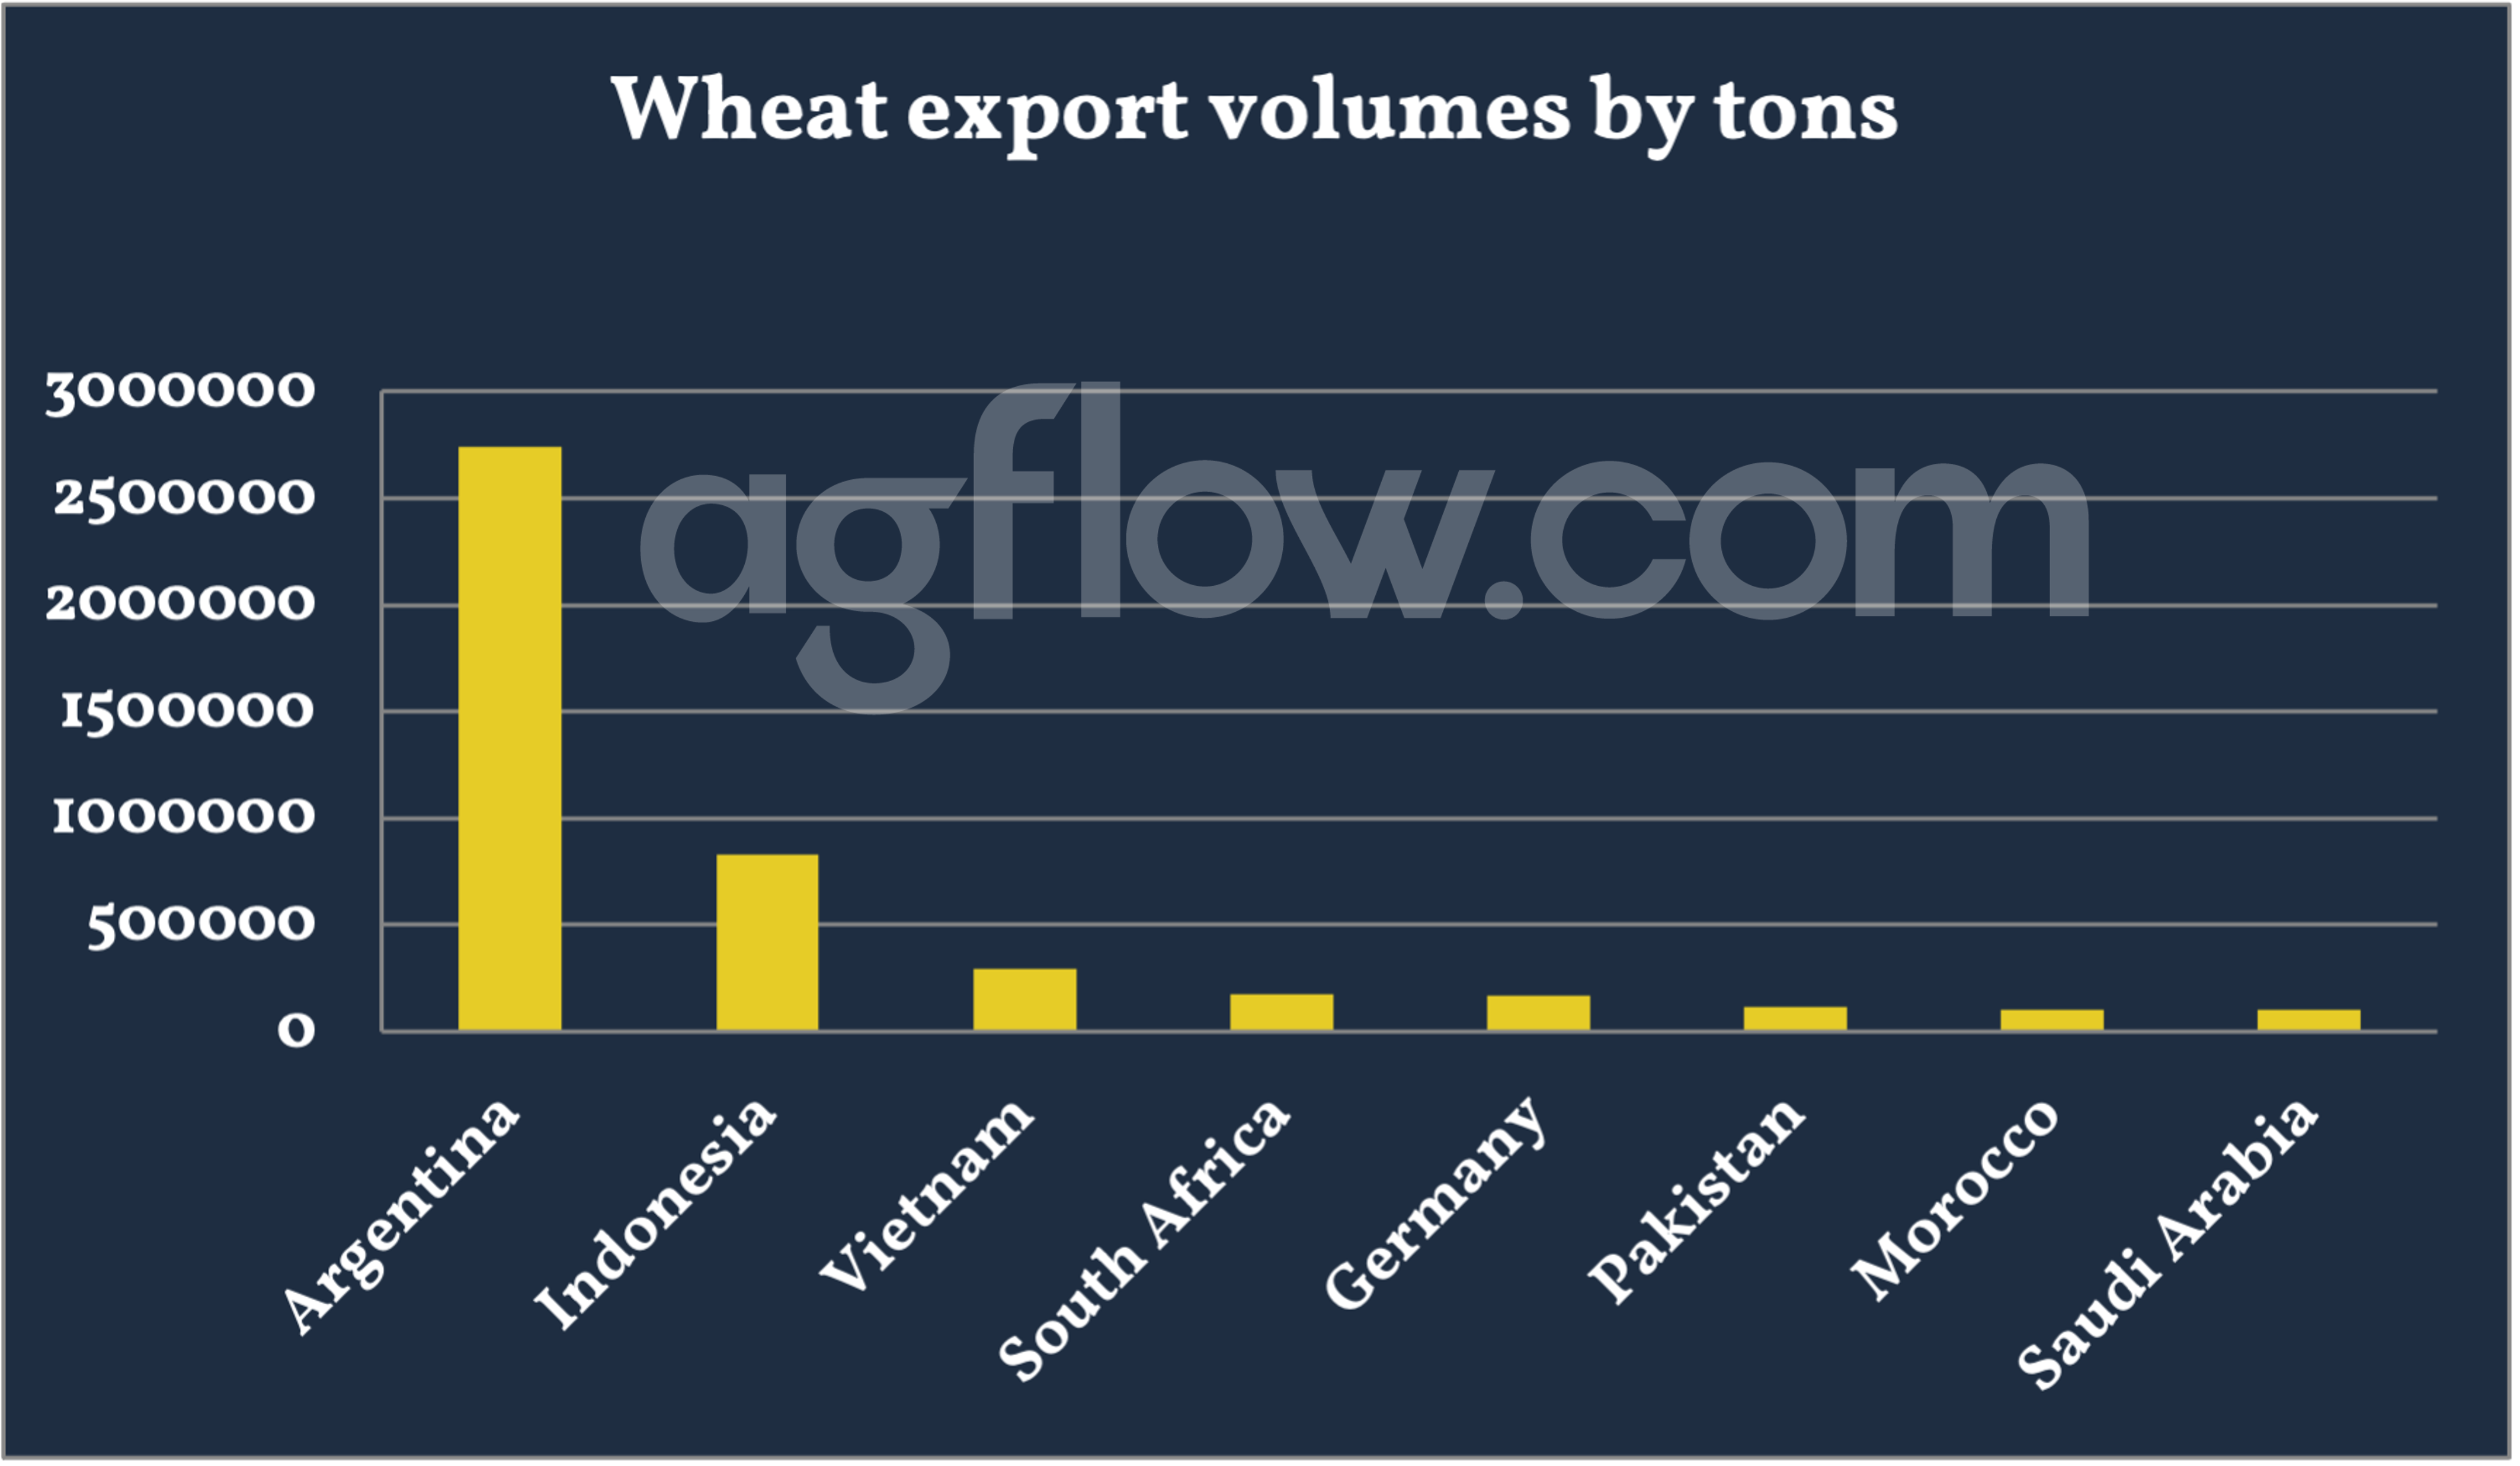 Wheat exports volumes by tons